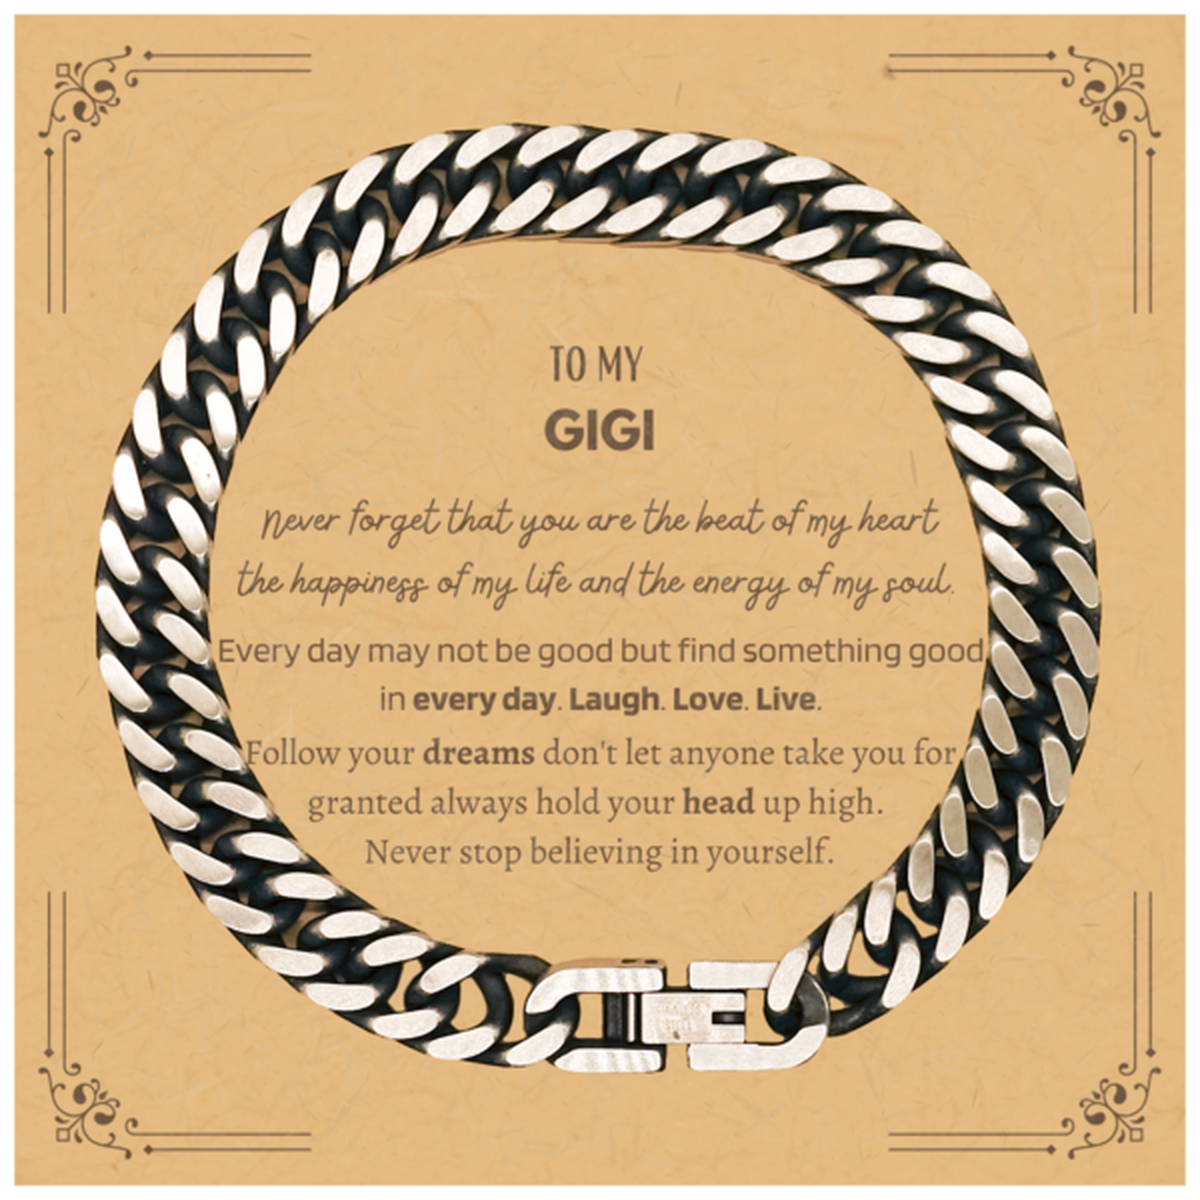 To My Gigi Message Card Gifts, Christmas Gigi Cuban Link Chain Bracelet Present, Birthday Unique Motivational For Gigi, To My Gigi Never forget that you are the beat of my heart the happiness of my life and the energy of my soul